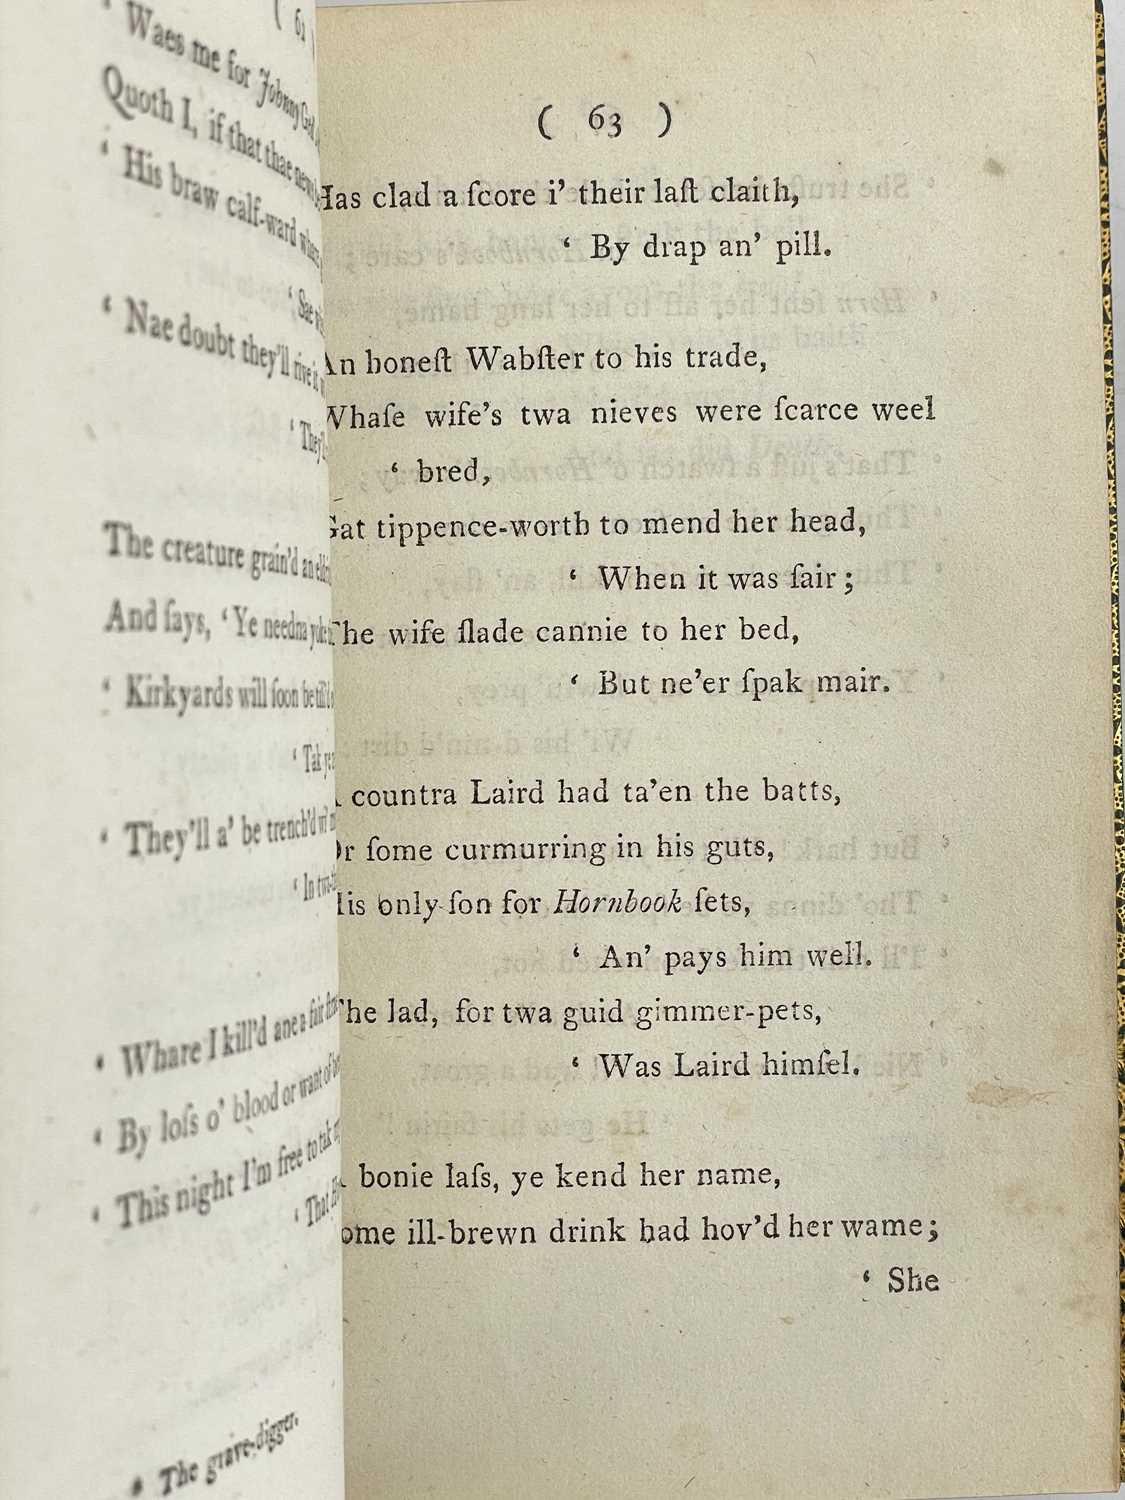 BURNS, Robert 'Poems Chiefly in the Scottish Dialect' - Image 8 of 10